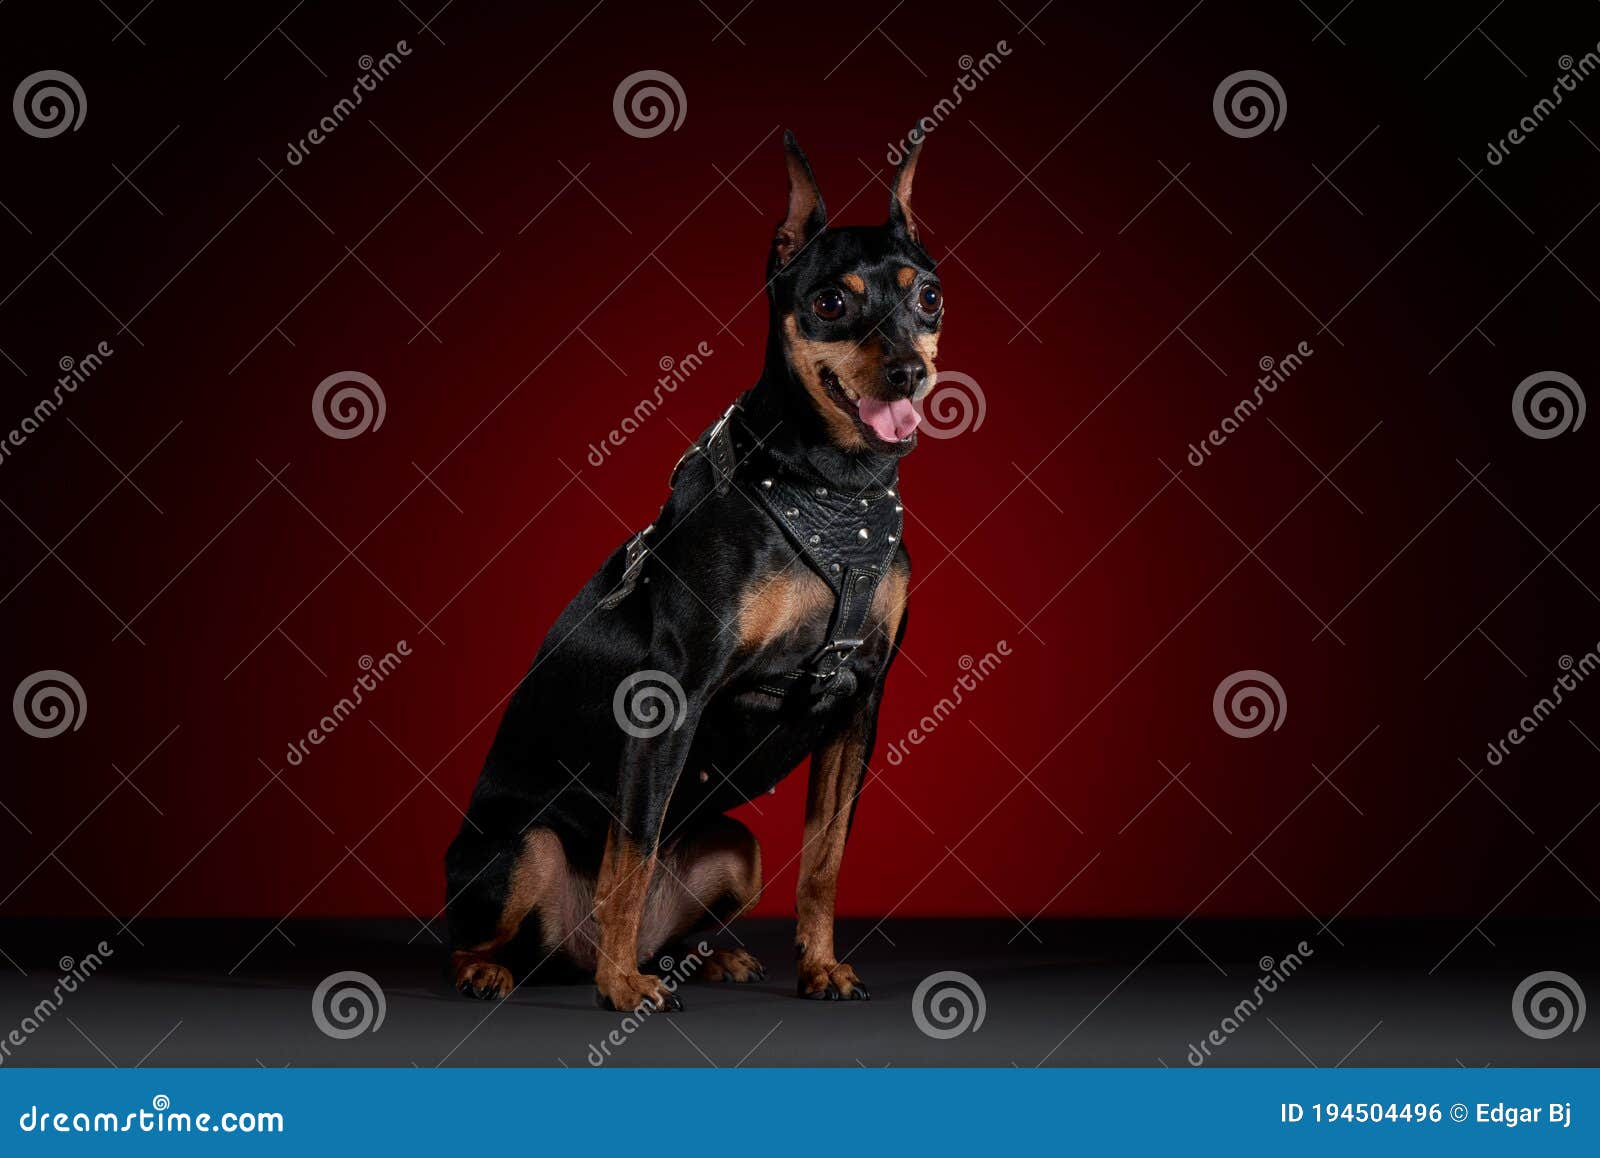 doberman dog with tongue sticking out sitting